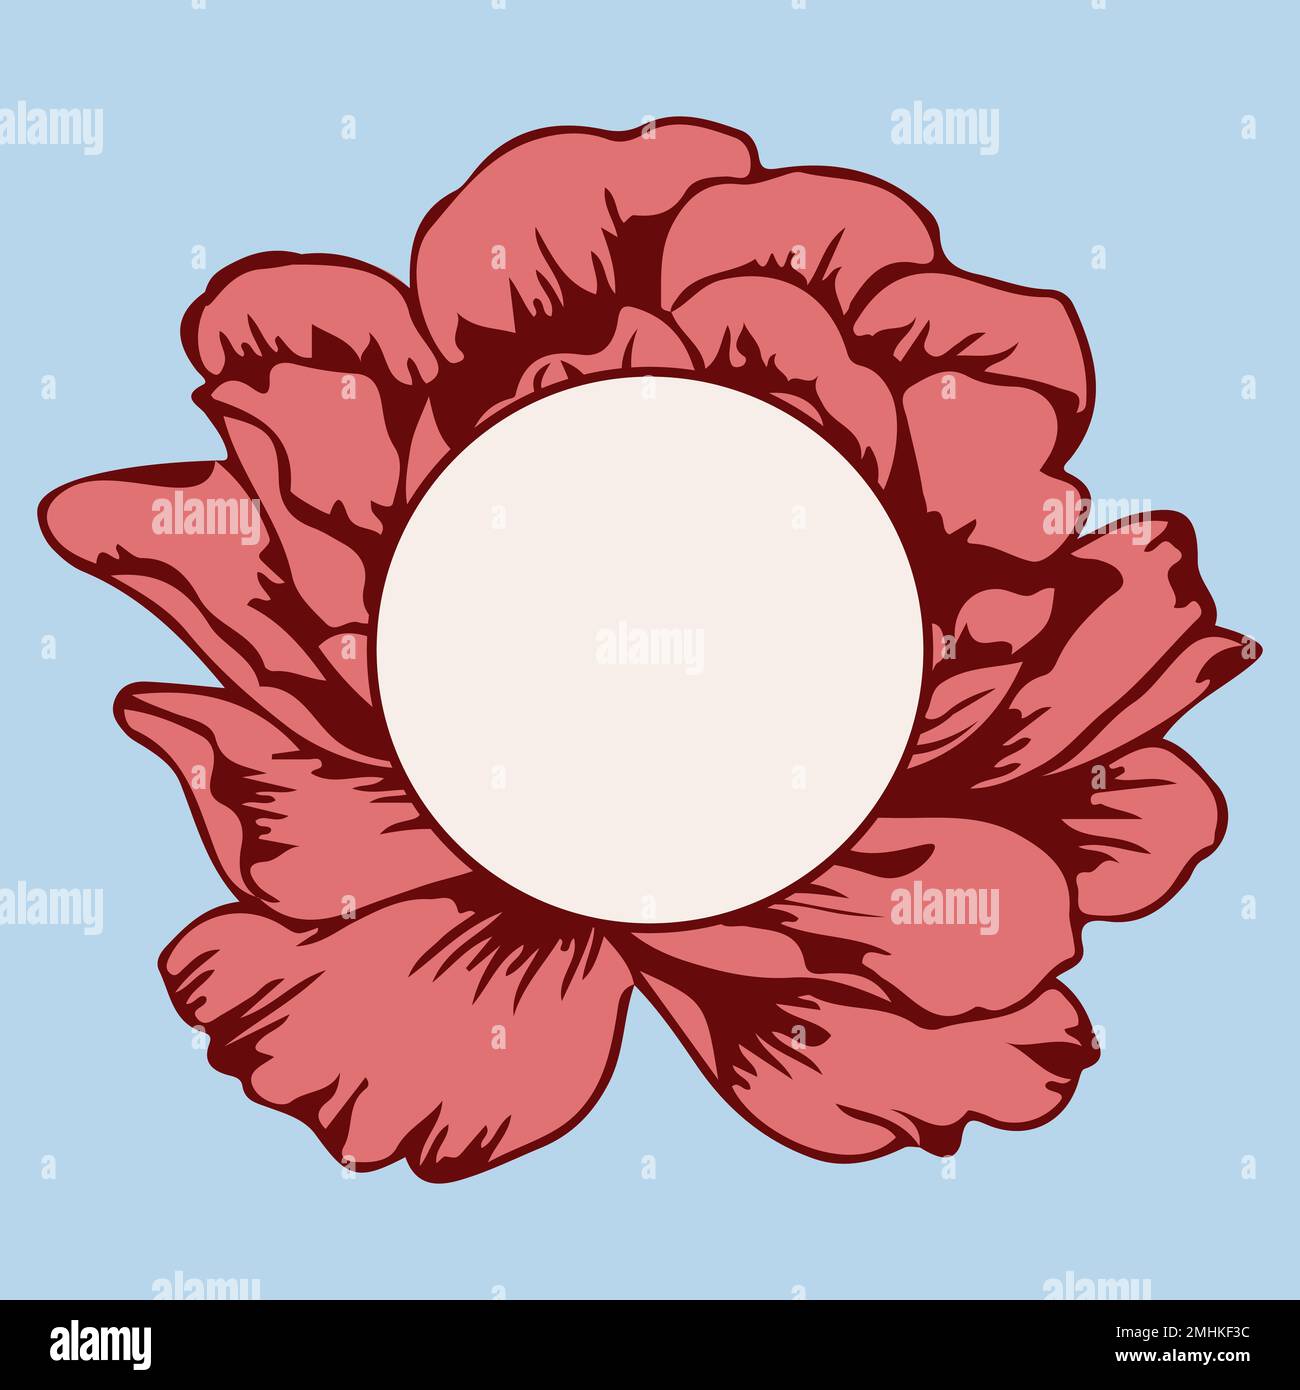 Greeting card with oval frame text box and beautiful blooming garden rose Stock Vector